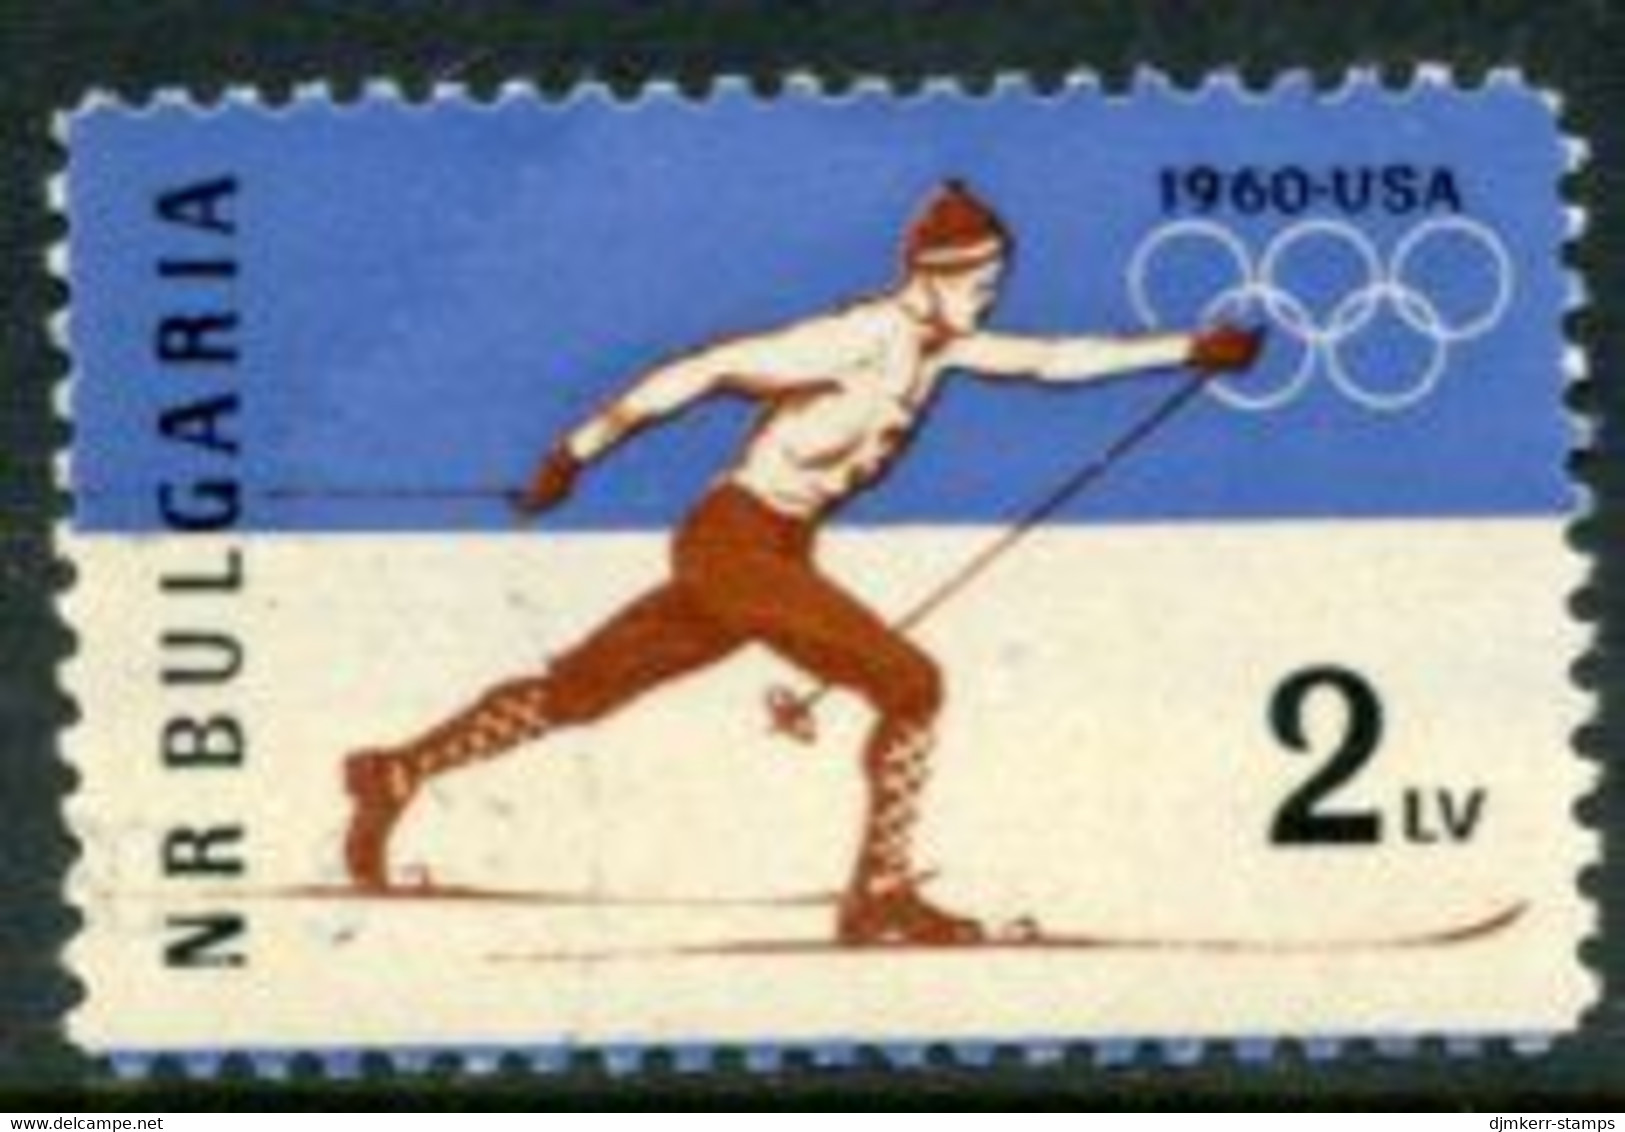 BULGARIA 1960 Winter Olympic Games Perforated MNH / **.  Michel 1153A - Unused Stamps